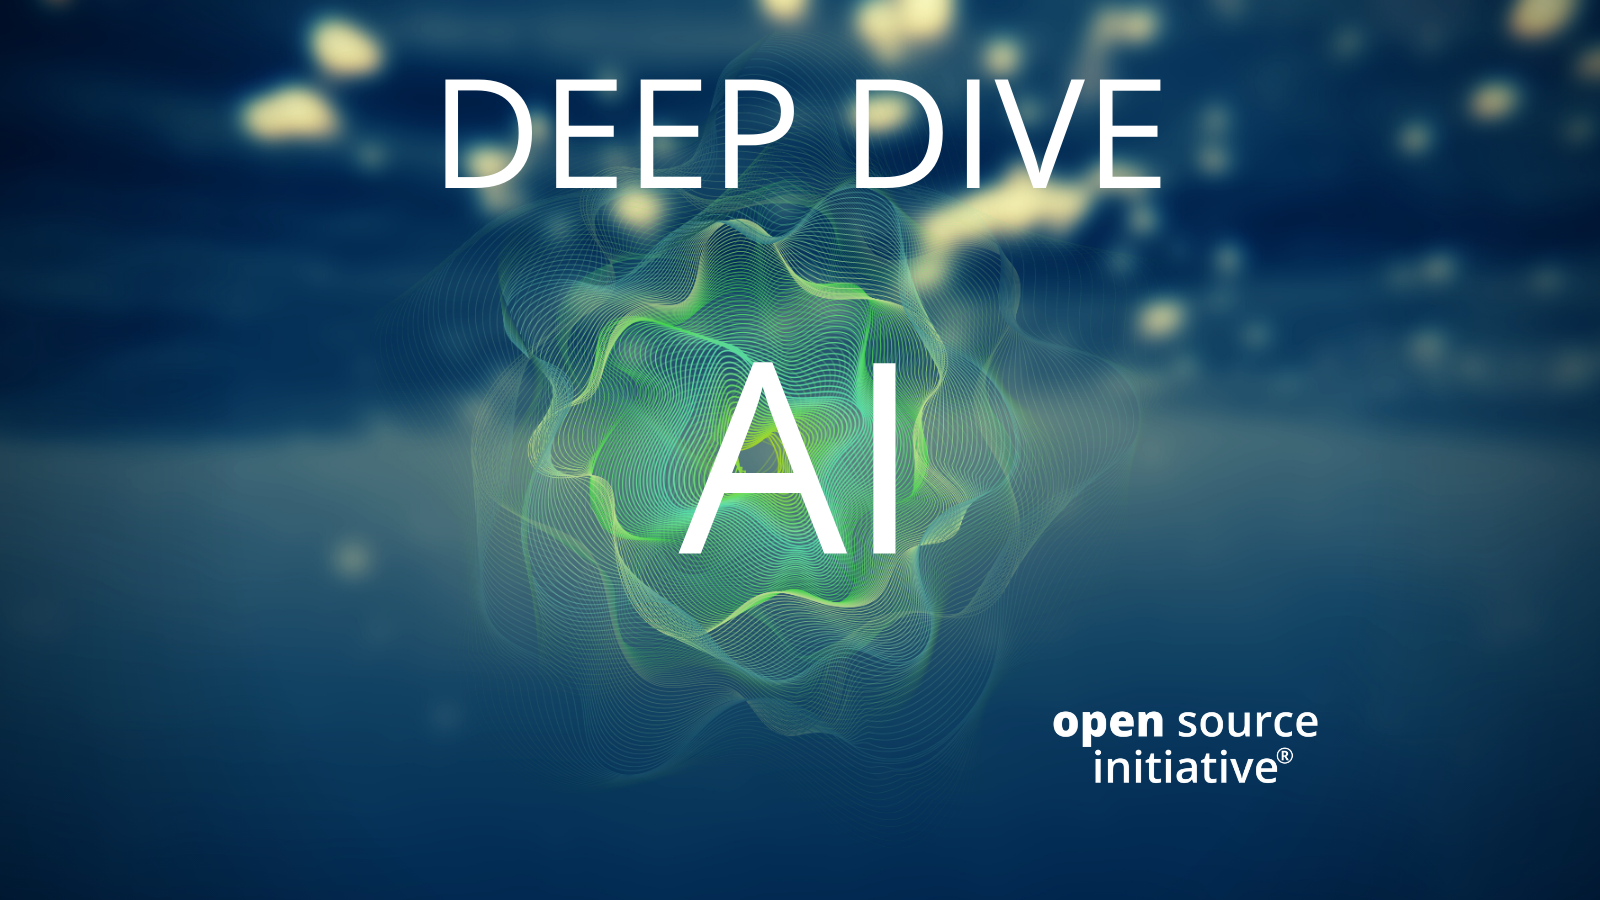 Welcome to Deep Dive AI